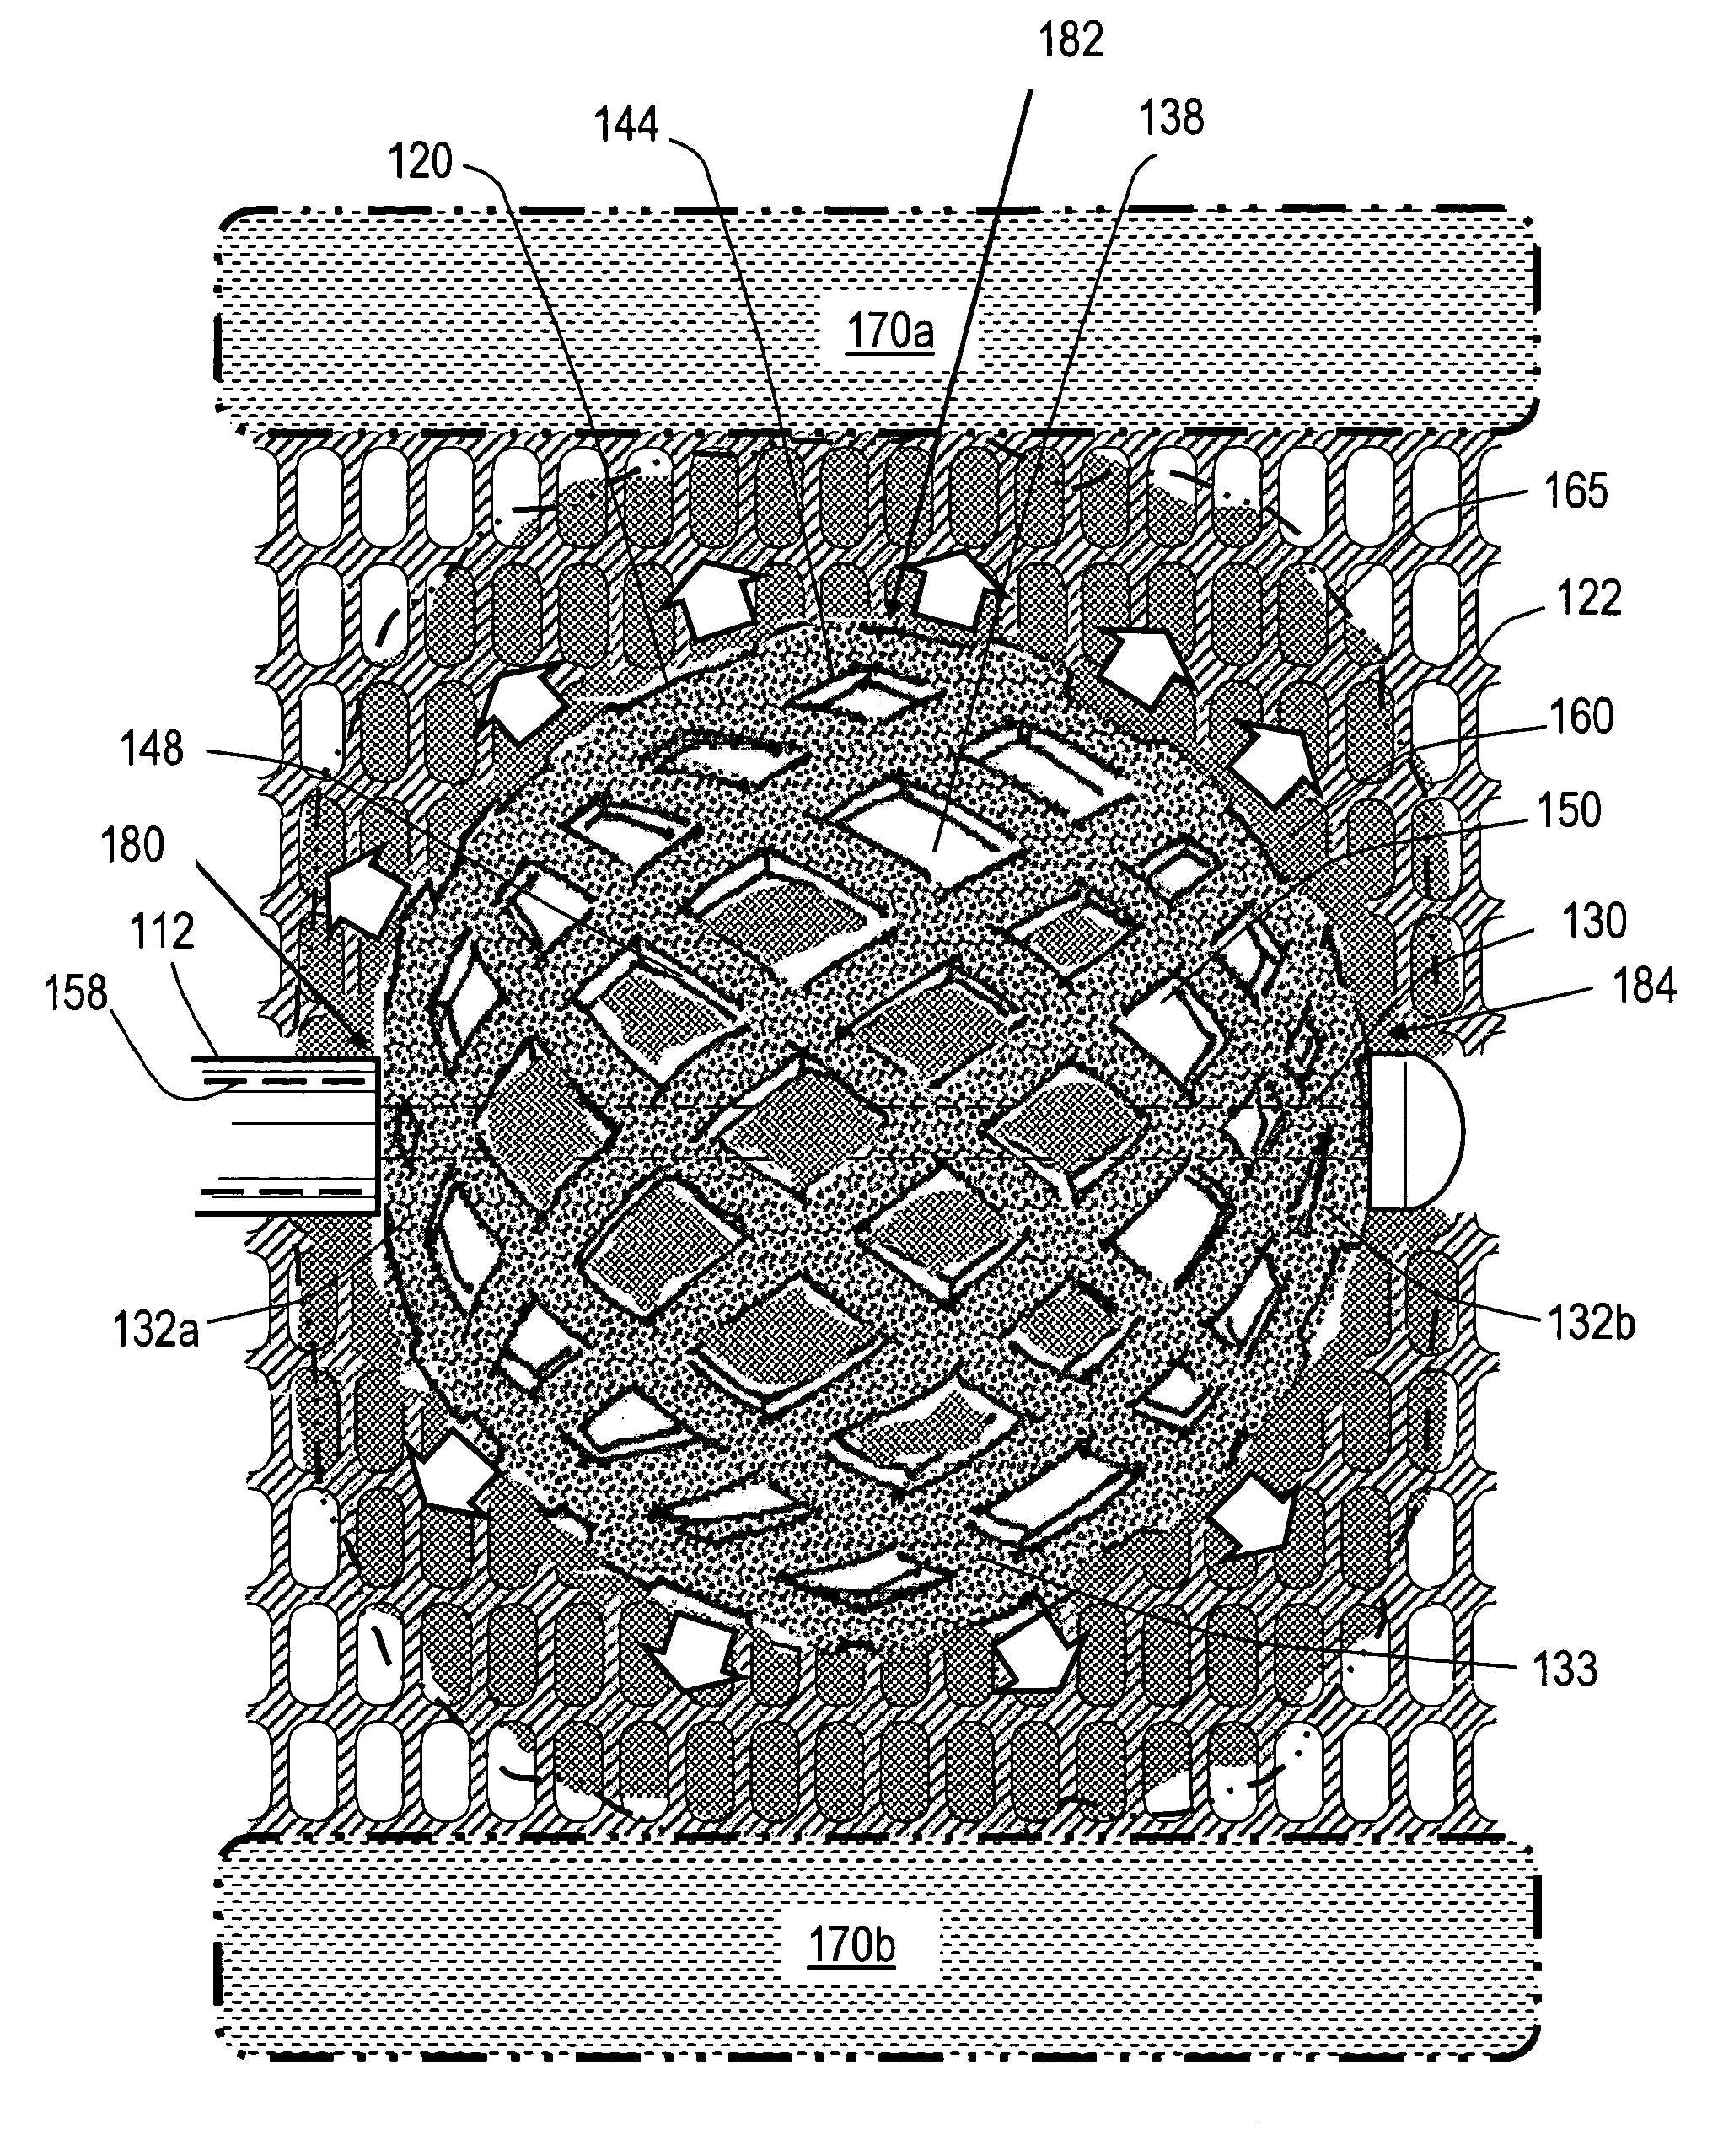 Stent systems and methods for spine treatment